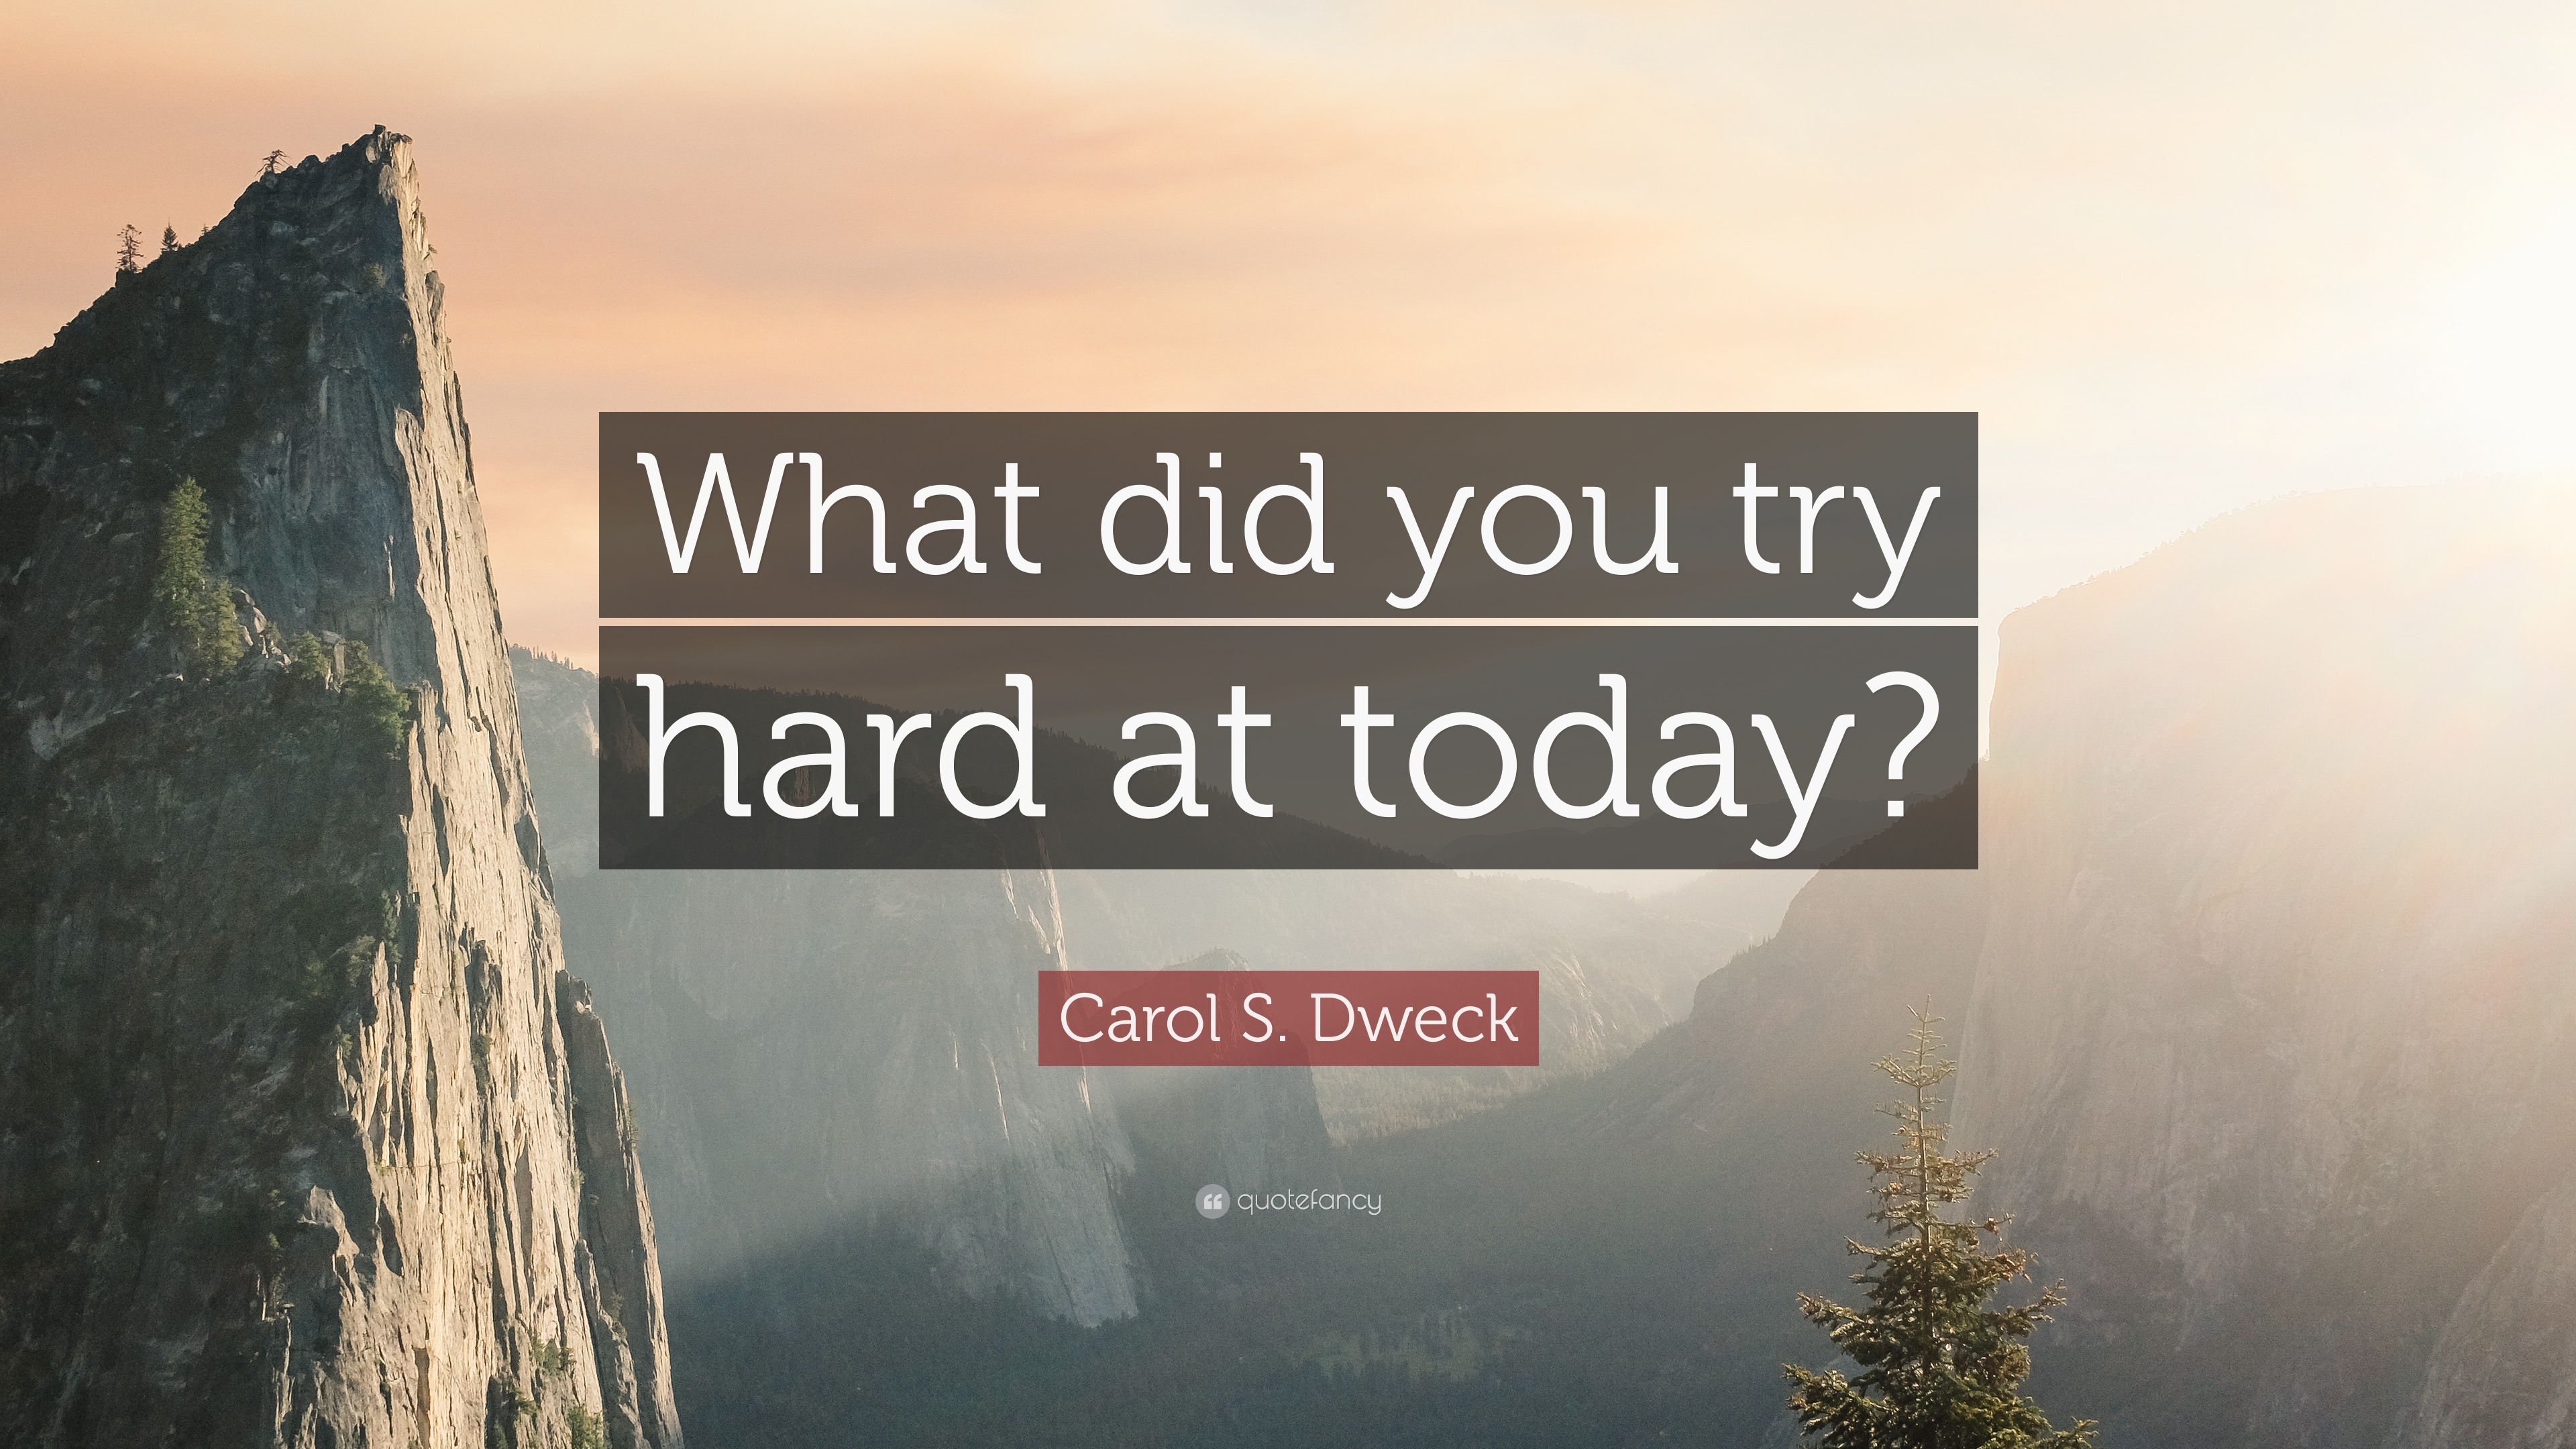 Carol S. Dweck Quote: “What did you try hard at today?” 12